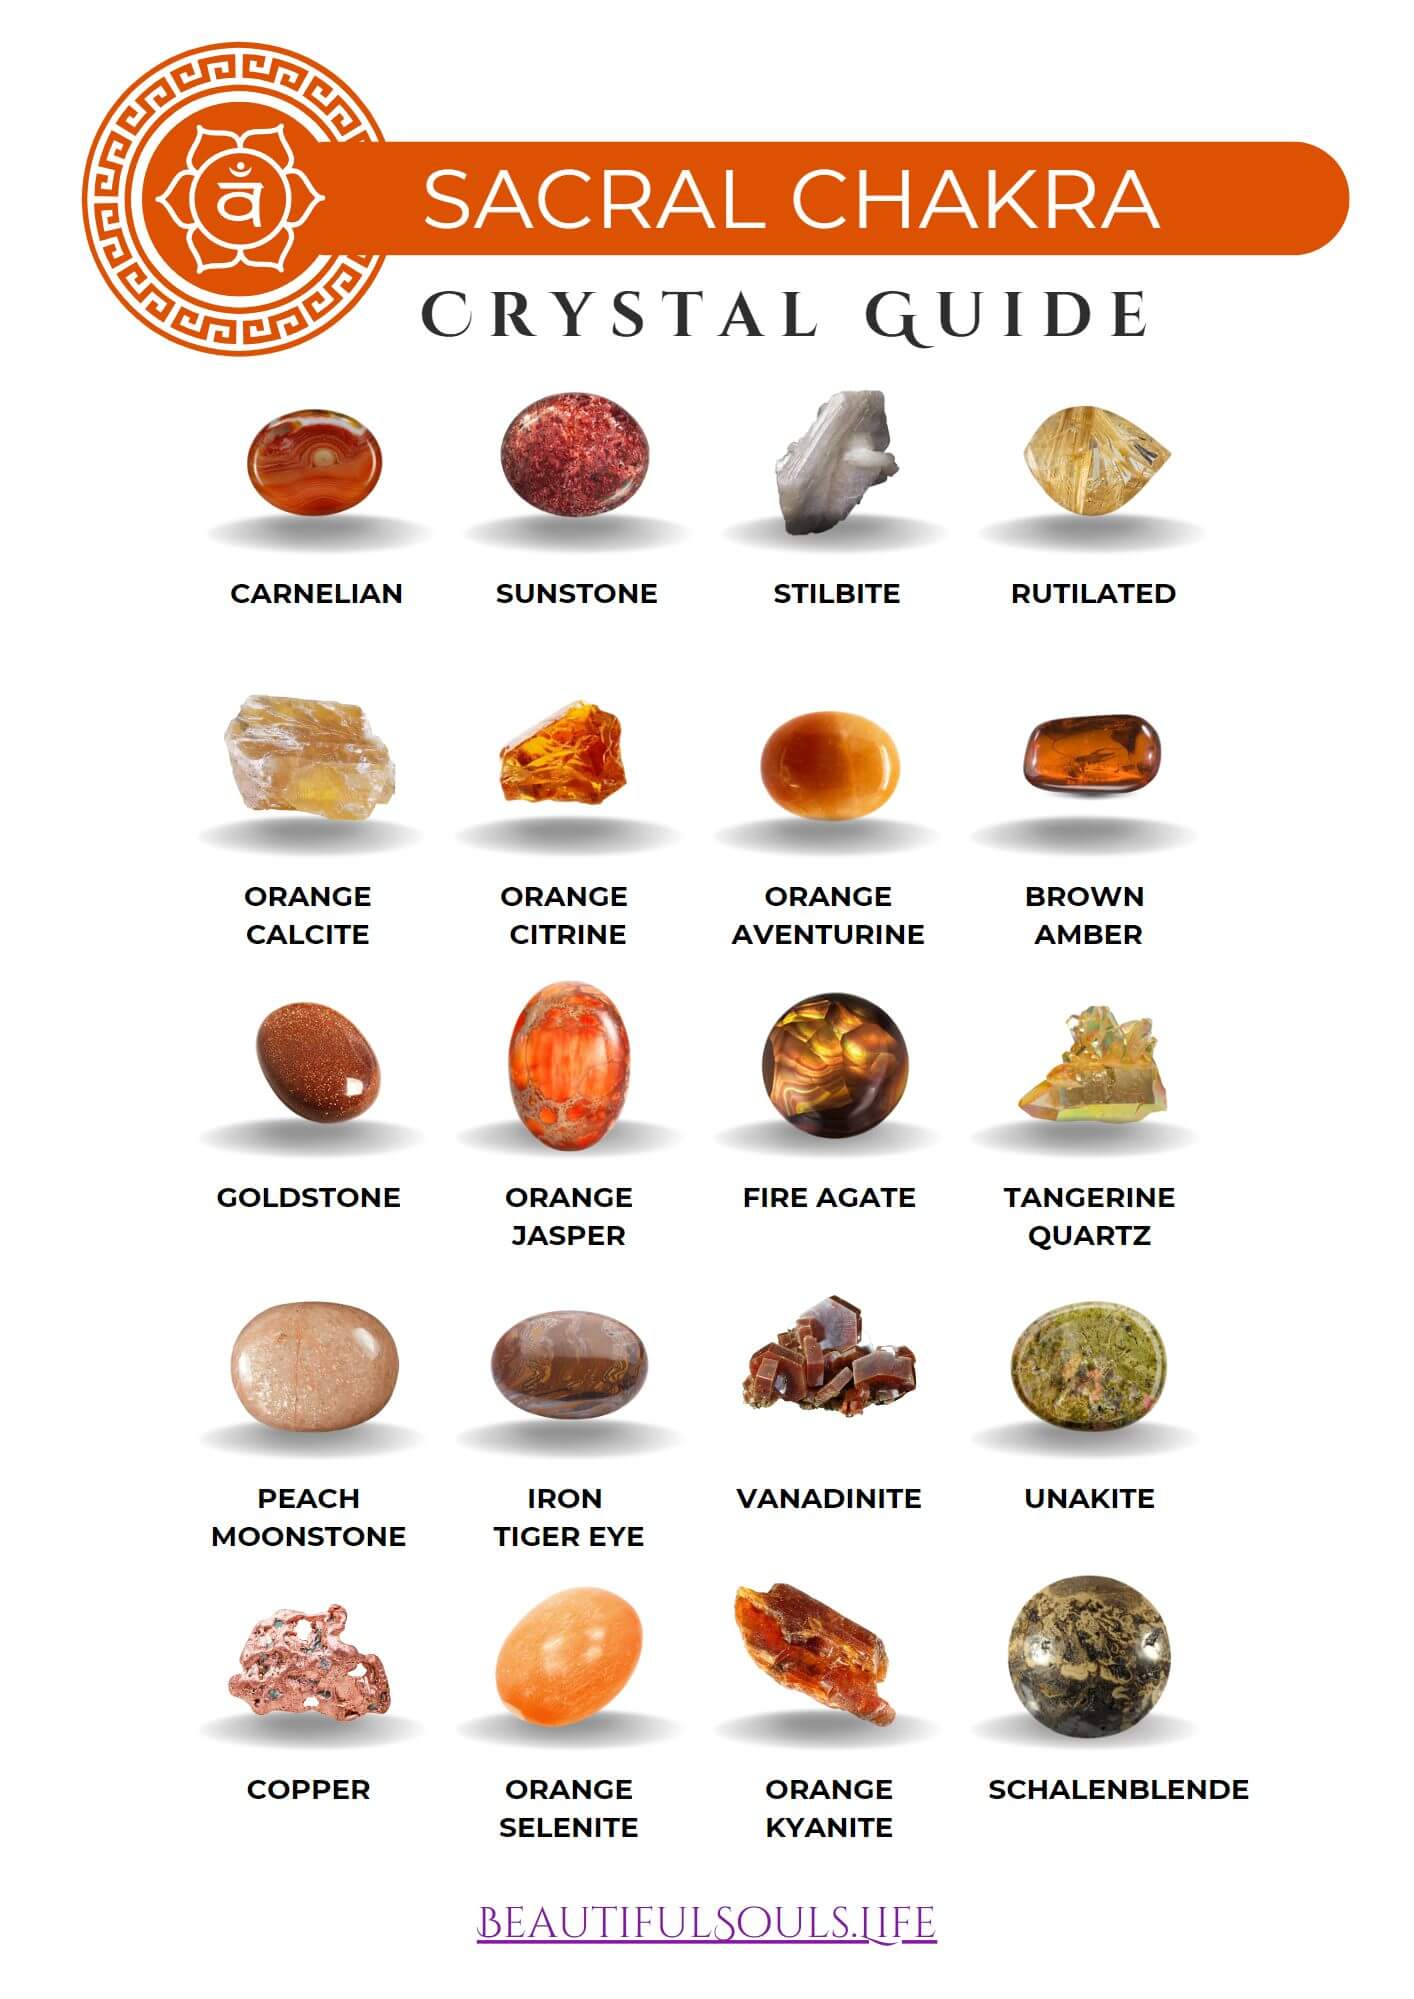 Minerals and crystals for Sacral 2nd Chakra